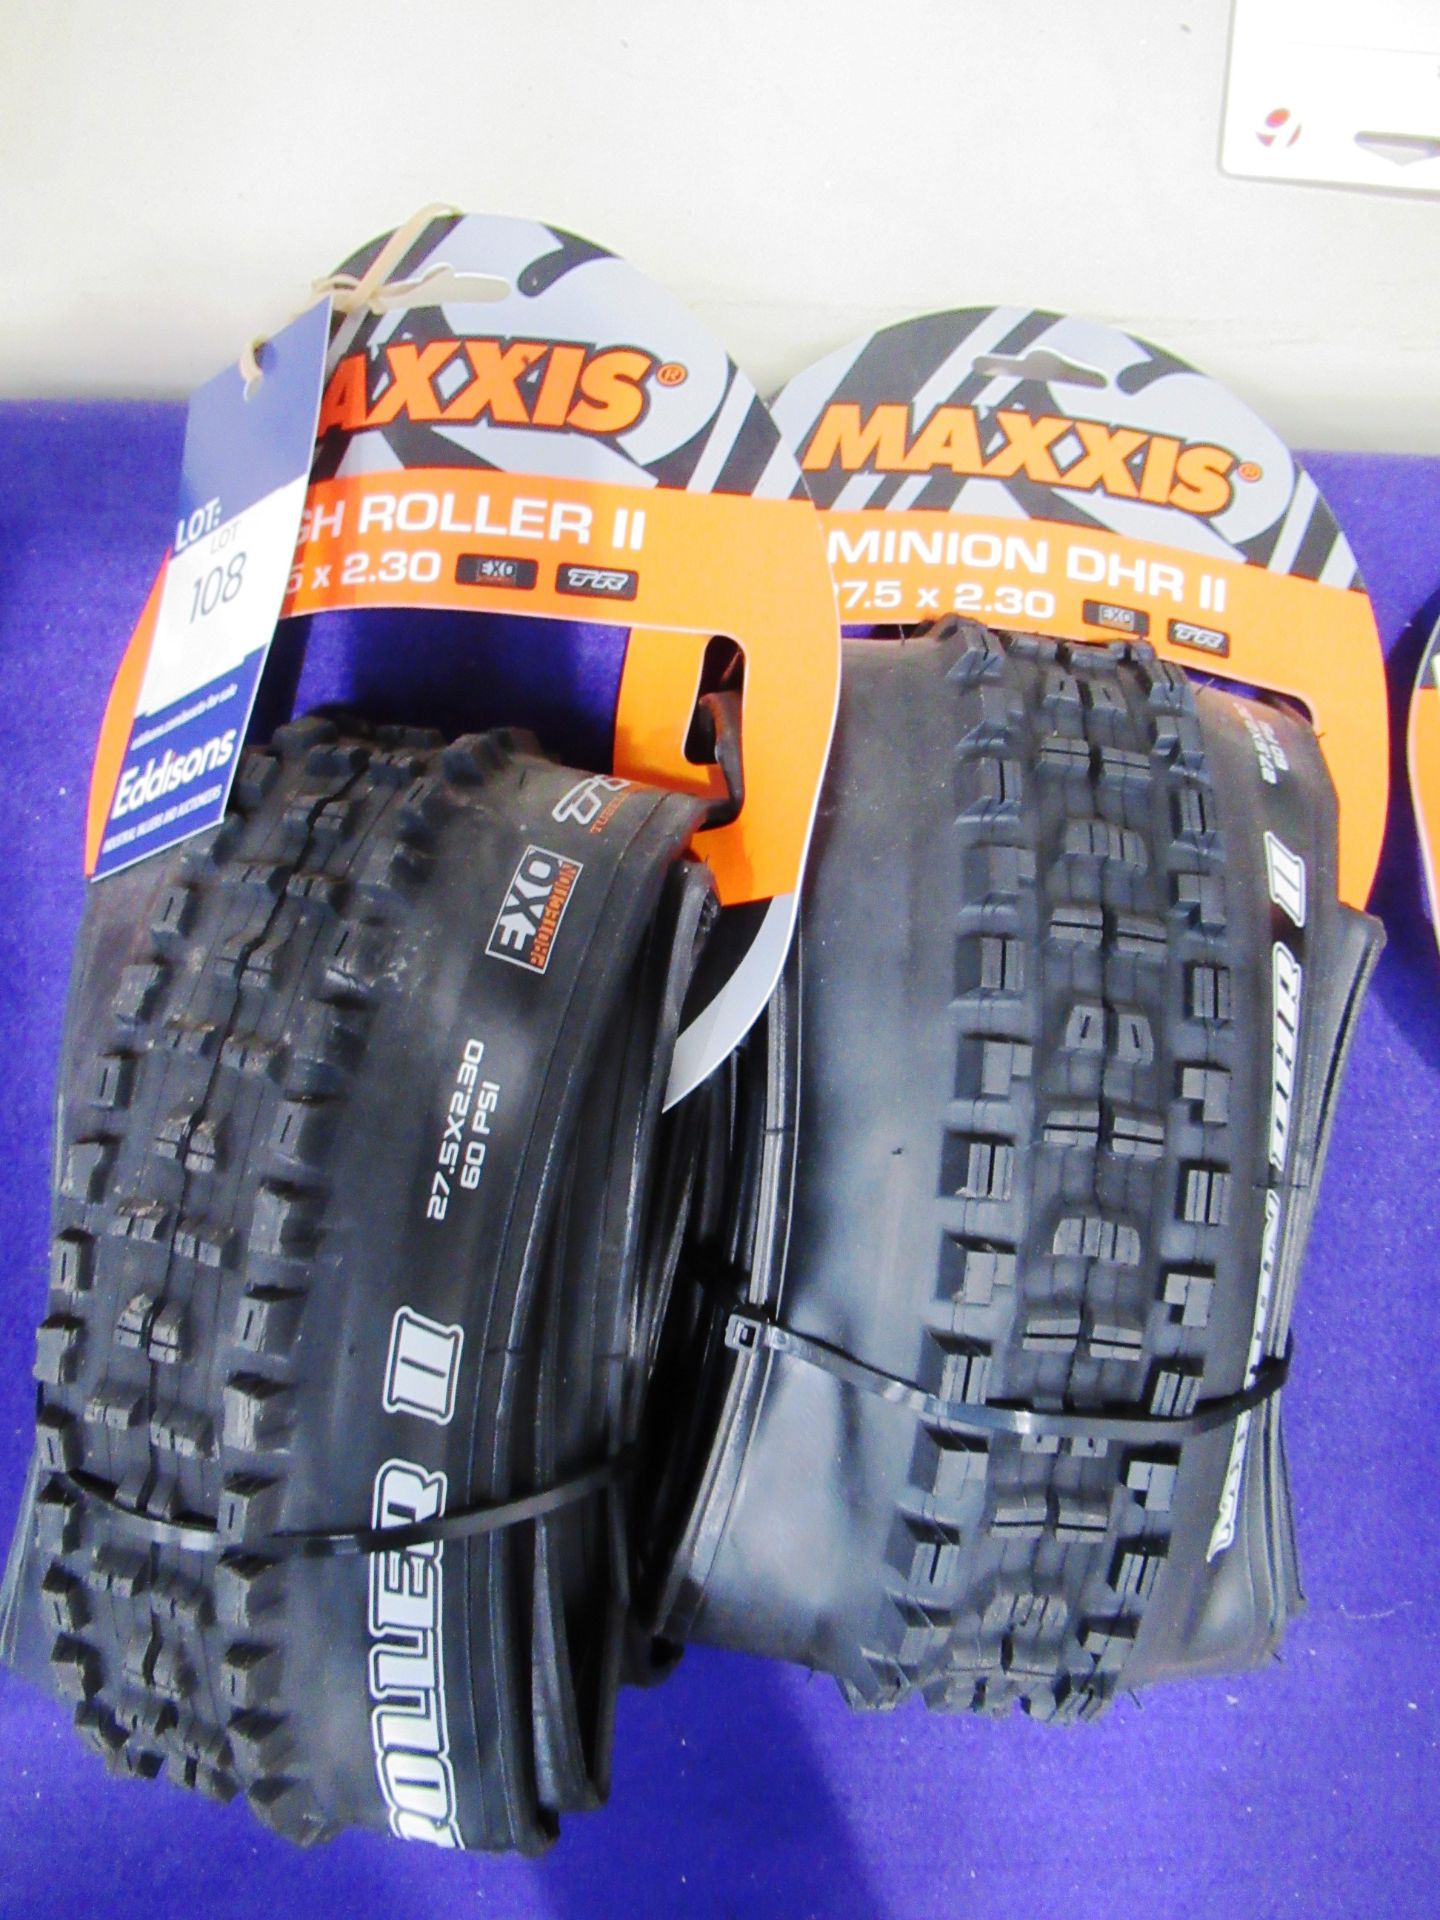 2x Maxxis High Roller II 27.5"x2.30" Bicycle Tyres. Total RRP £99.98